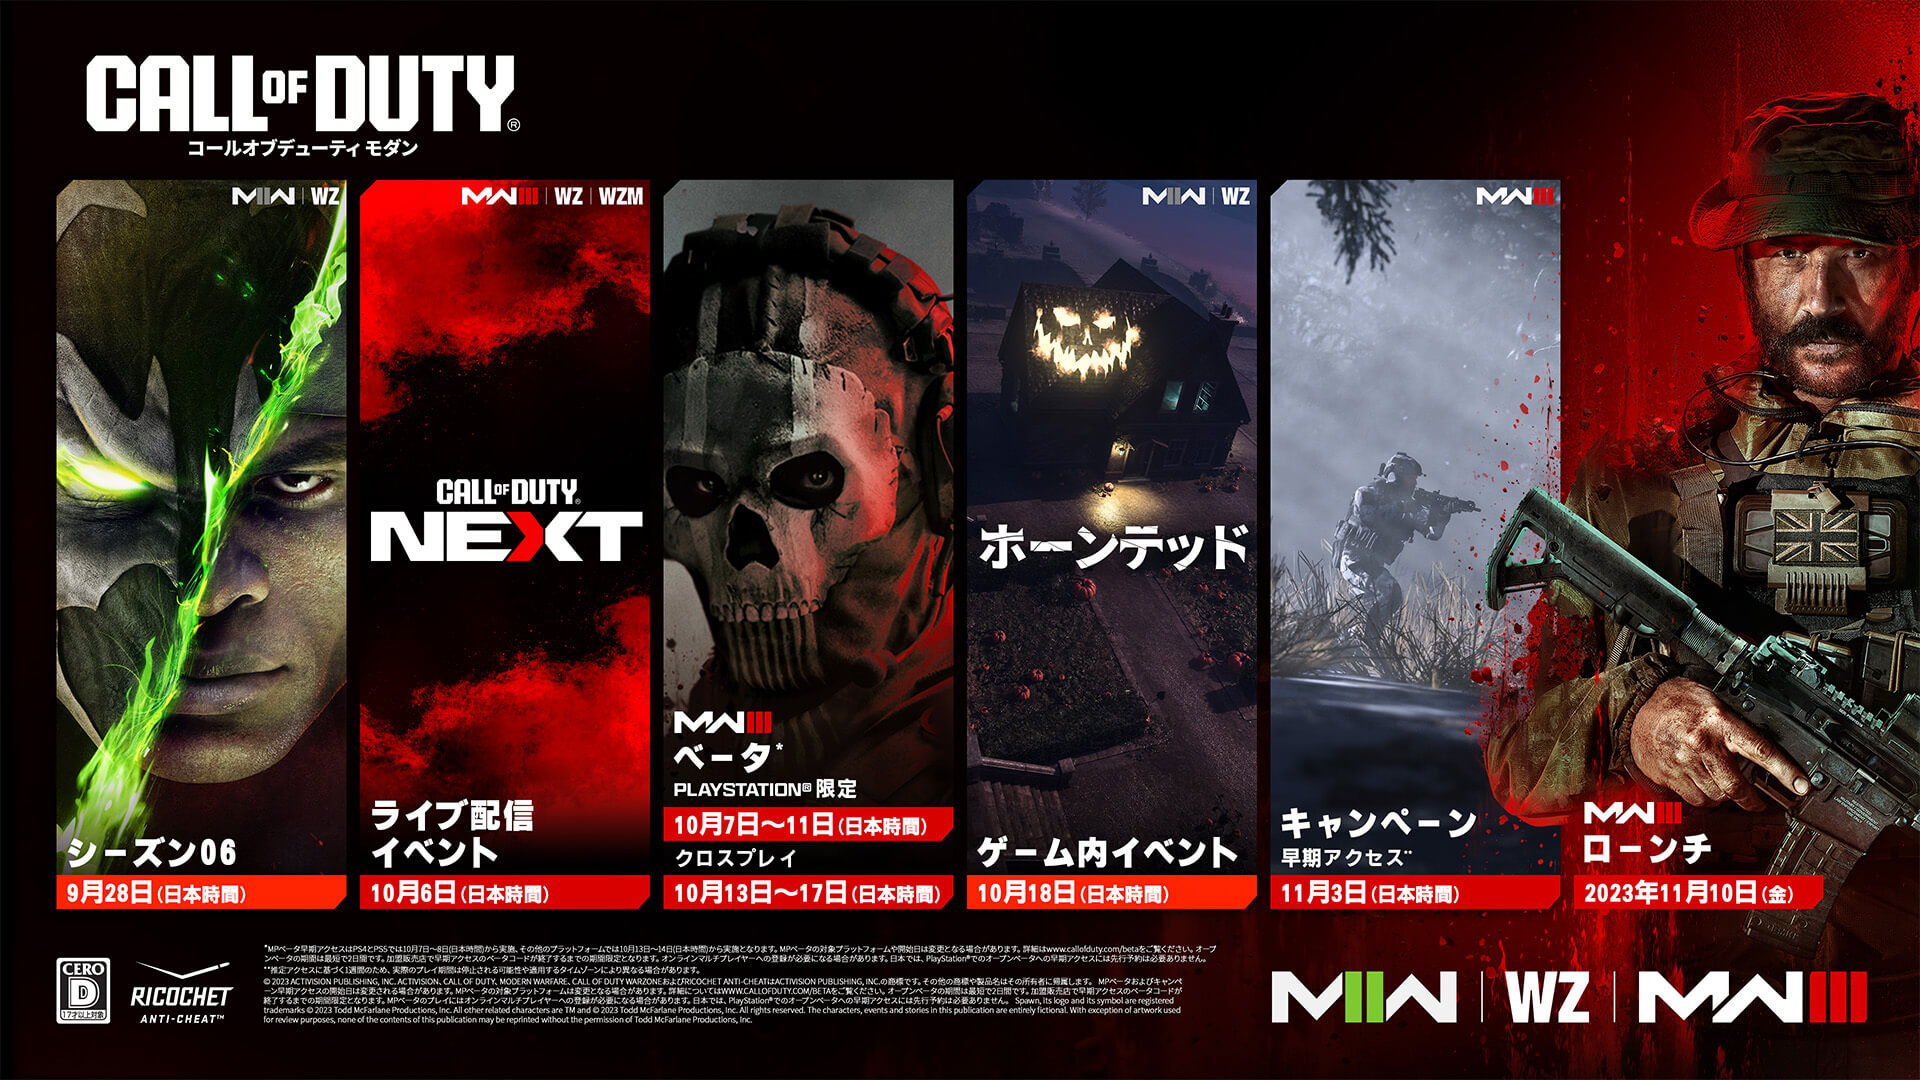 <p>CALL OF DUTY®。MWII | WZ。アル・シモンズ(スポーン)のキーアート。シーズン06。MWIII | WZ | WZM。Call of Duty Nextのキーアート。ライブ配信イベント。10月6日(日本時間)。MWIII。ベータ*。PlayStation®限定。10月7日～11日(日本時間)。クロスプレイ。10月13日～17日(日本時間)。MWII | WZ。ホーンテッド。ゲーム内イベント。10月18日(日本時間)。MWIII。キャンペーン早期アクセス。11月3日(日本時間)。MWIII。ローンチ。2023年11月10日(金)。Warzoneロゴ。Modern Warfare IIロゴ。Modern Warfare IIIロゴ。Ricochetロゴ。レーティングロゴ。© 2023 Activision Publishing, Inc. ACTIVISION、CALL OF DUTY、MODERN WARFARE、CALL OF DUTY WARZONEおよびRICOCHET ANTI-CHEATはActivision Publishing, Inc.の商標です。その他の商標や製品名はその所有者に帰属します。MPベータおよびキャンペーン早期アクセスの開始日は変更される場合があります。MPベータの対応プラットフォームは変更される場合があります。詳細はhttp://www.callofduty.com/betaでご覧ください。オープンベータの期間は最短で2日間です。加盟販売店で早期アクセスのベータコードが終了するまでの期間限定となります。MPベータをプレイするにはオンラインマルチプレイヤーの登録が必要になる場合があります。日本では、PlayStation®でのオープンベータへの早期アクセスには先行予約は必要ありません。Spawn, its logo and its symbol are registered trademarks. © 2023 Todd McFarlane Productions, Inc. All other related characters are TM and © 2023 Todd McFarlane Productions, Inc. All rights reserved. The characters, events and stories in this publication are entirely fictional. With exception of artwork used for review purposes, none of the contents of this publication may be reprinted without the permission of Todd McFarlane Productions, Inc.</p>
